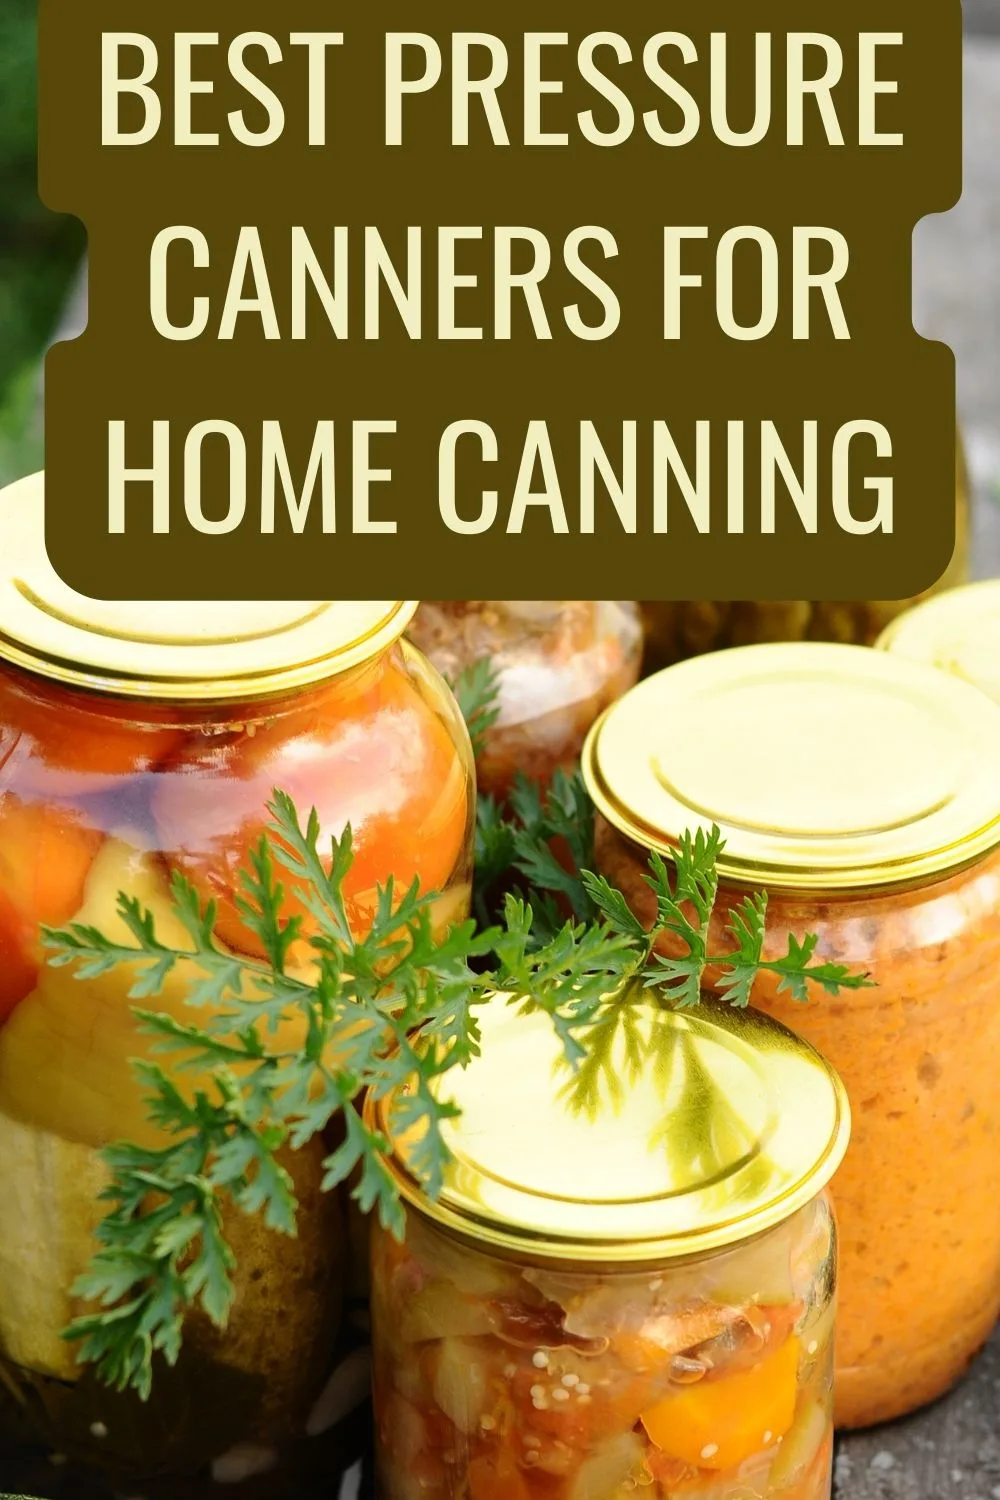 Best pressure canners for home canning